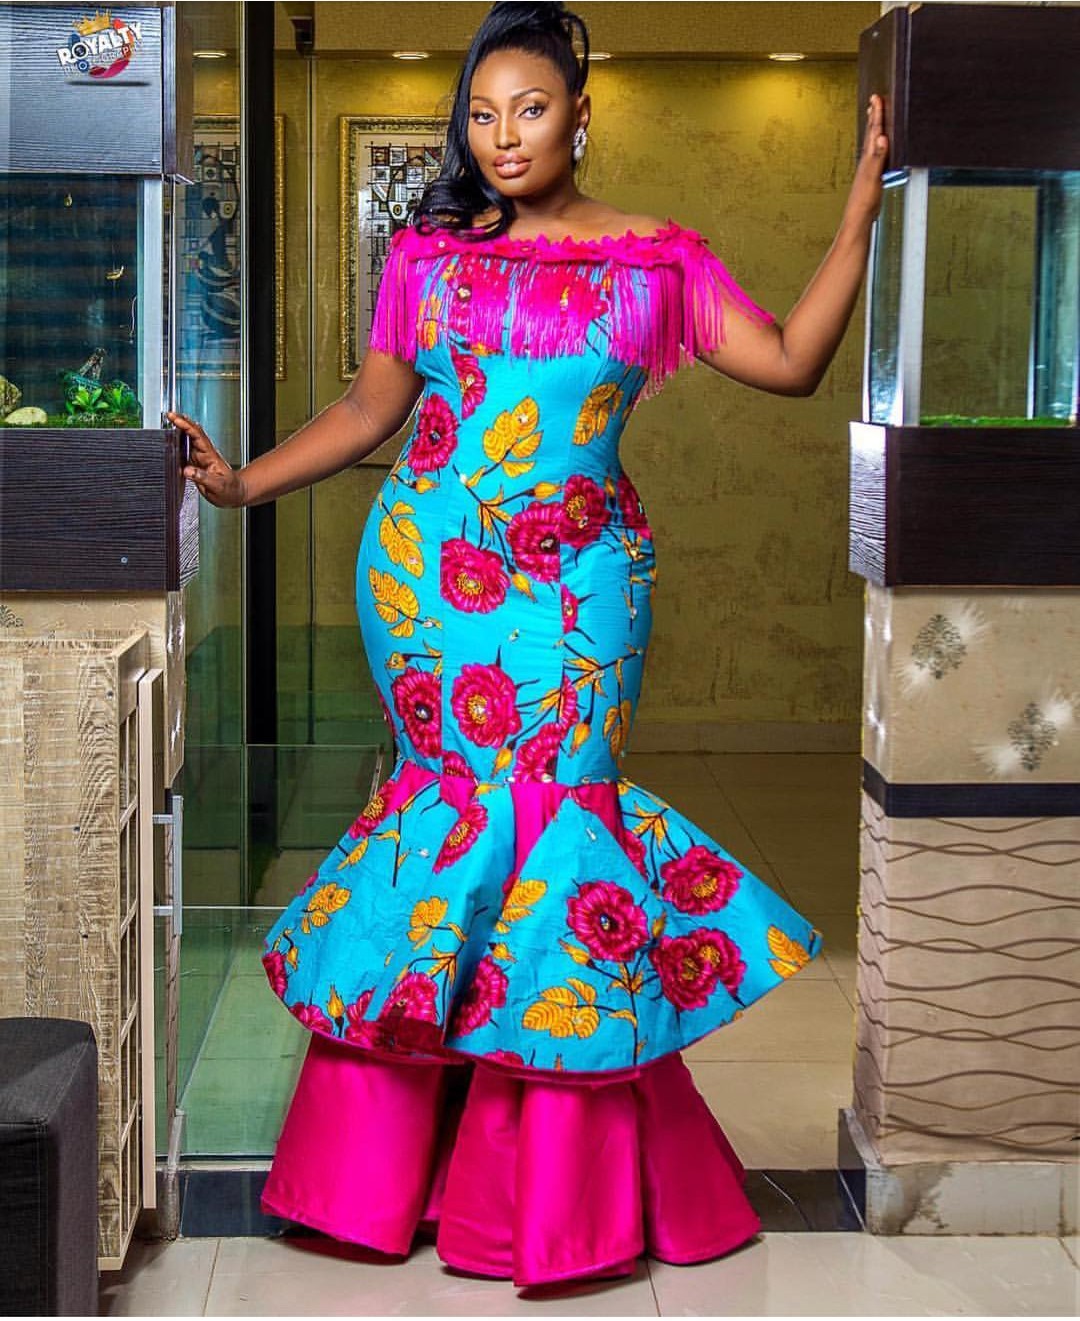 Look theses Pictures Of Queen Ankara Designs - fashionist now